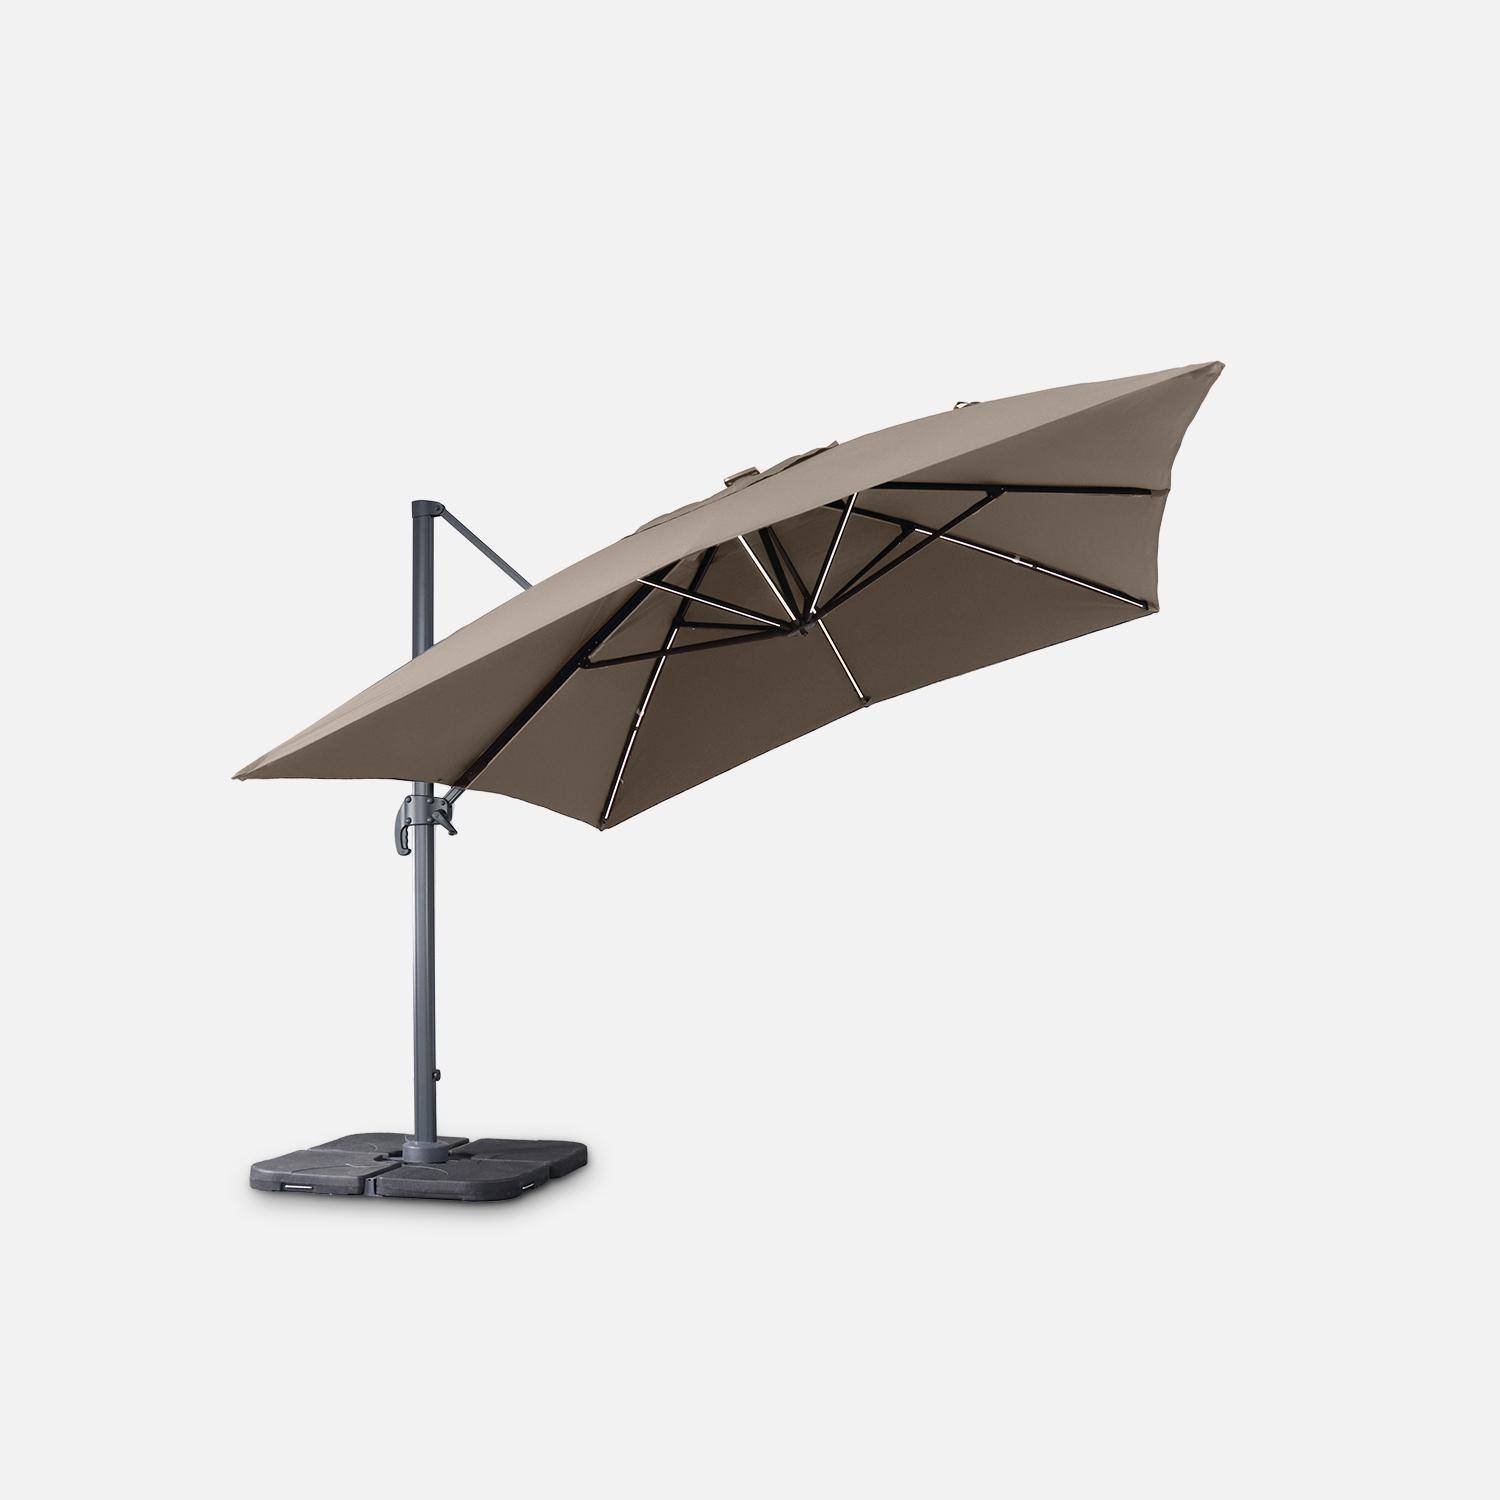 Premium quality rectangular 3x4m cantilever parasol with solar-powered integrated LED lights, tiltable, foldable , 360° rotation, cover included, beige,sweeek,Photo3